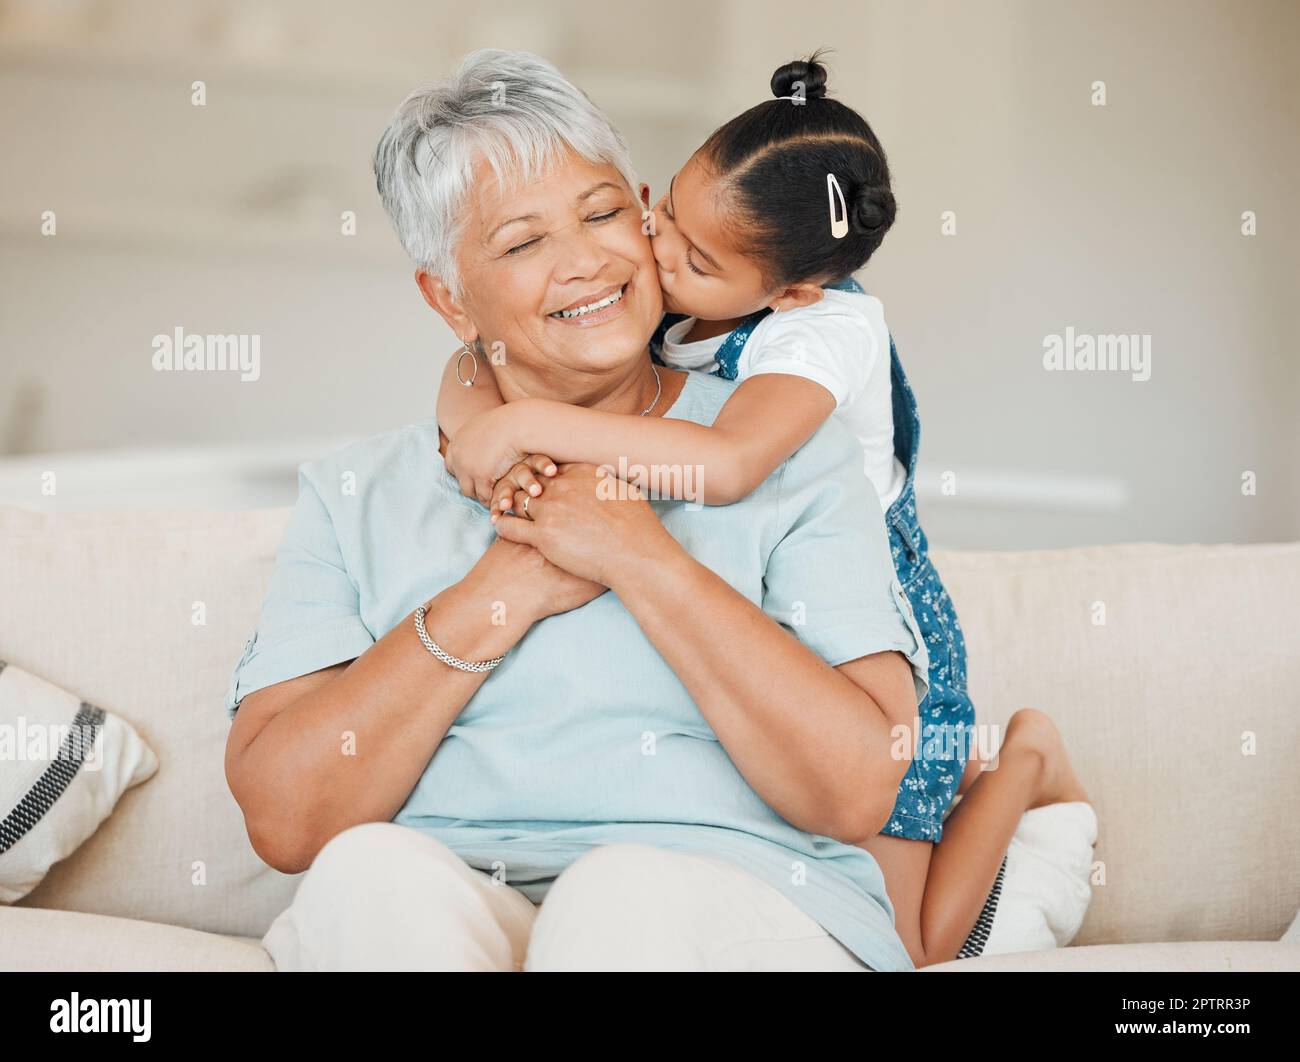 Blended families woven together by choice. a grandmother and granddaughter bonding on the sofa at home Stock Photo